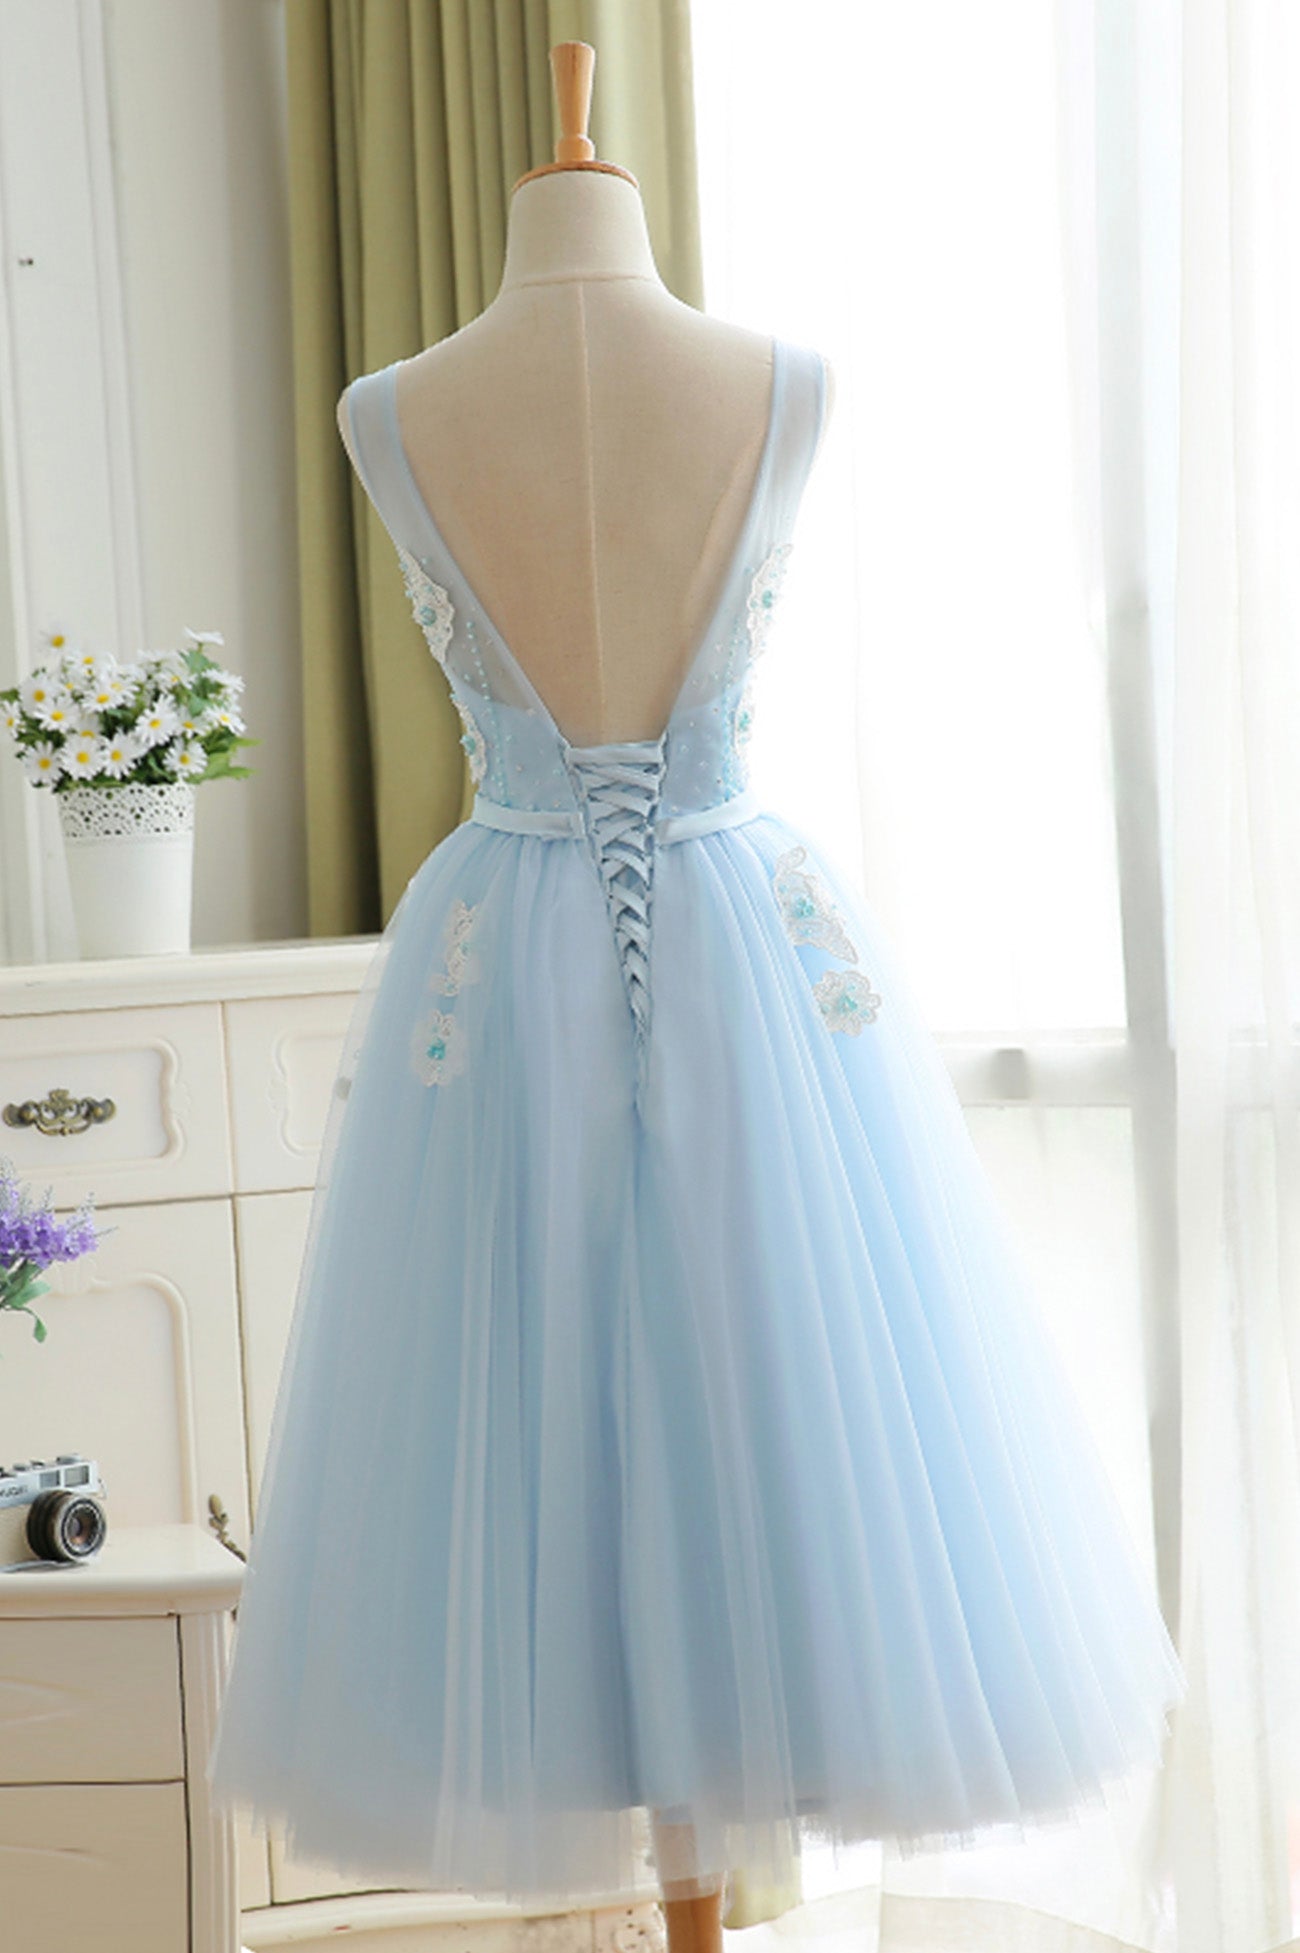 Prom Dress 2016, Blue Tulle Lace Short Prom Dress, A-Line Homecoming Party Dress